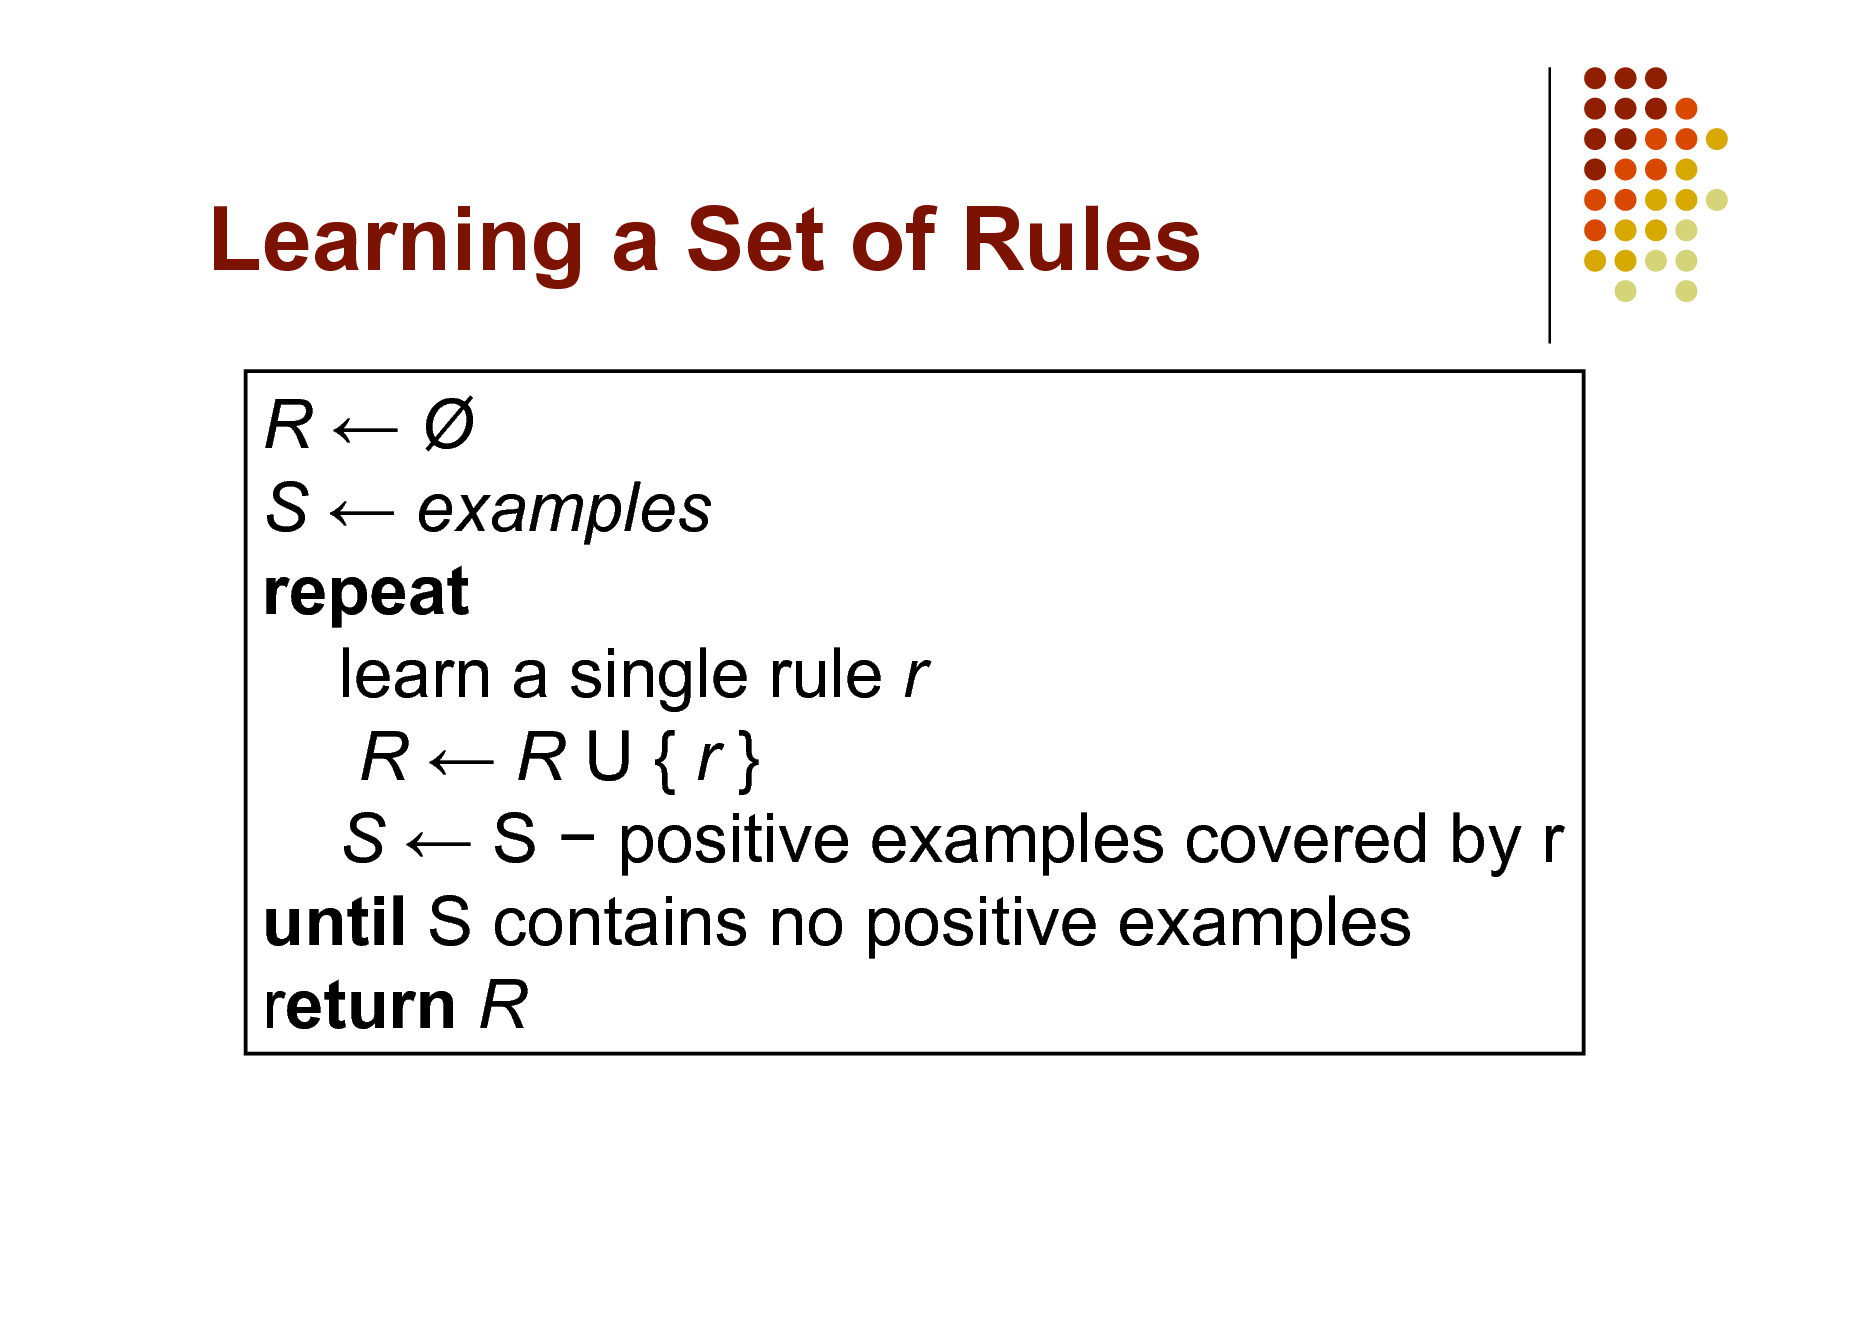 Slide: Learning a Set of Rules
R S  examples repeat learn a single rule r RRU{r} S  S  positive examples covered by r until S contains no positive examples return R

